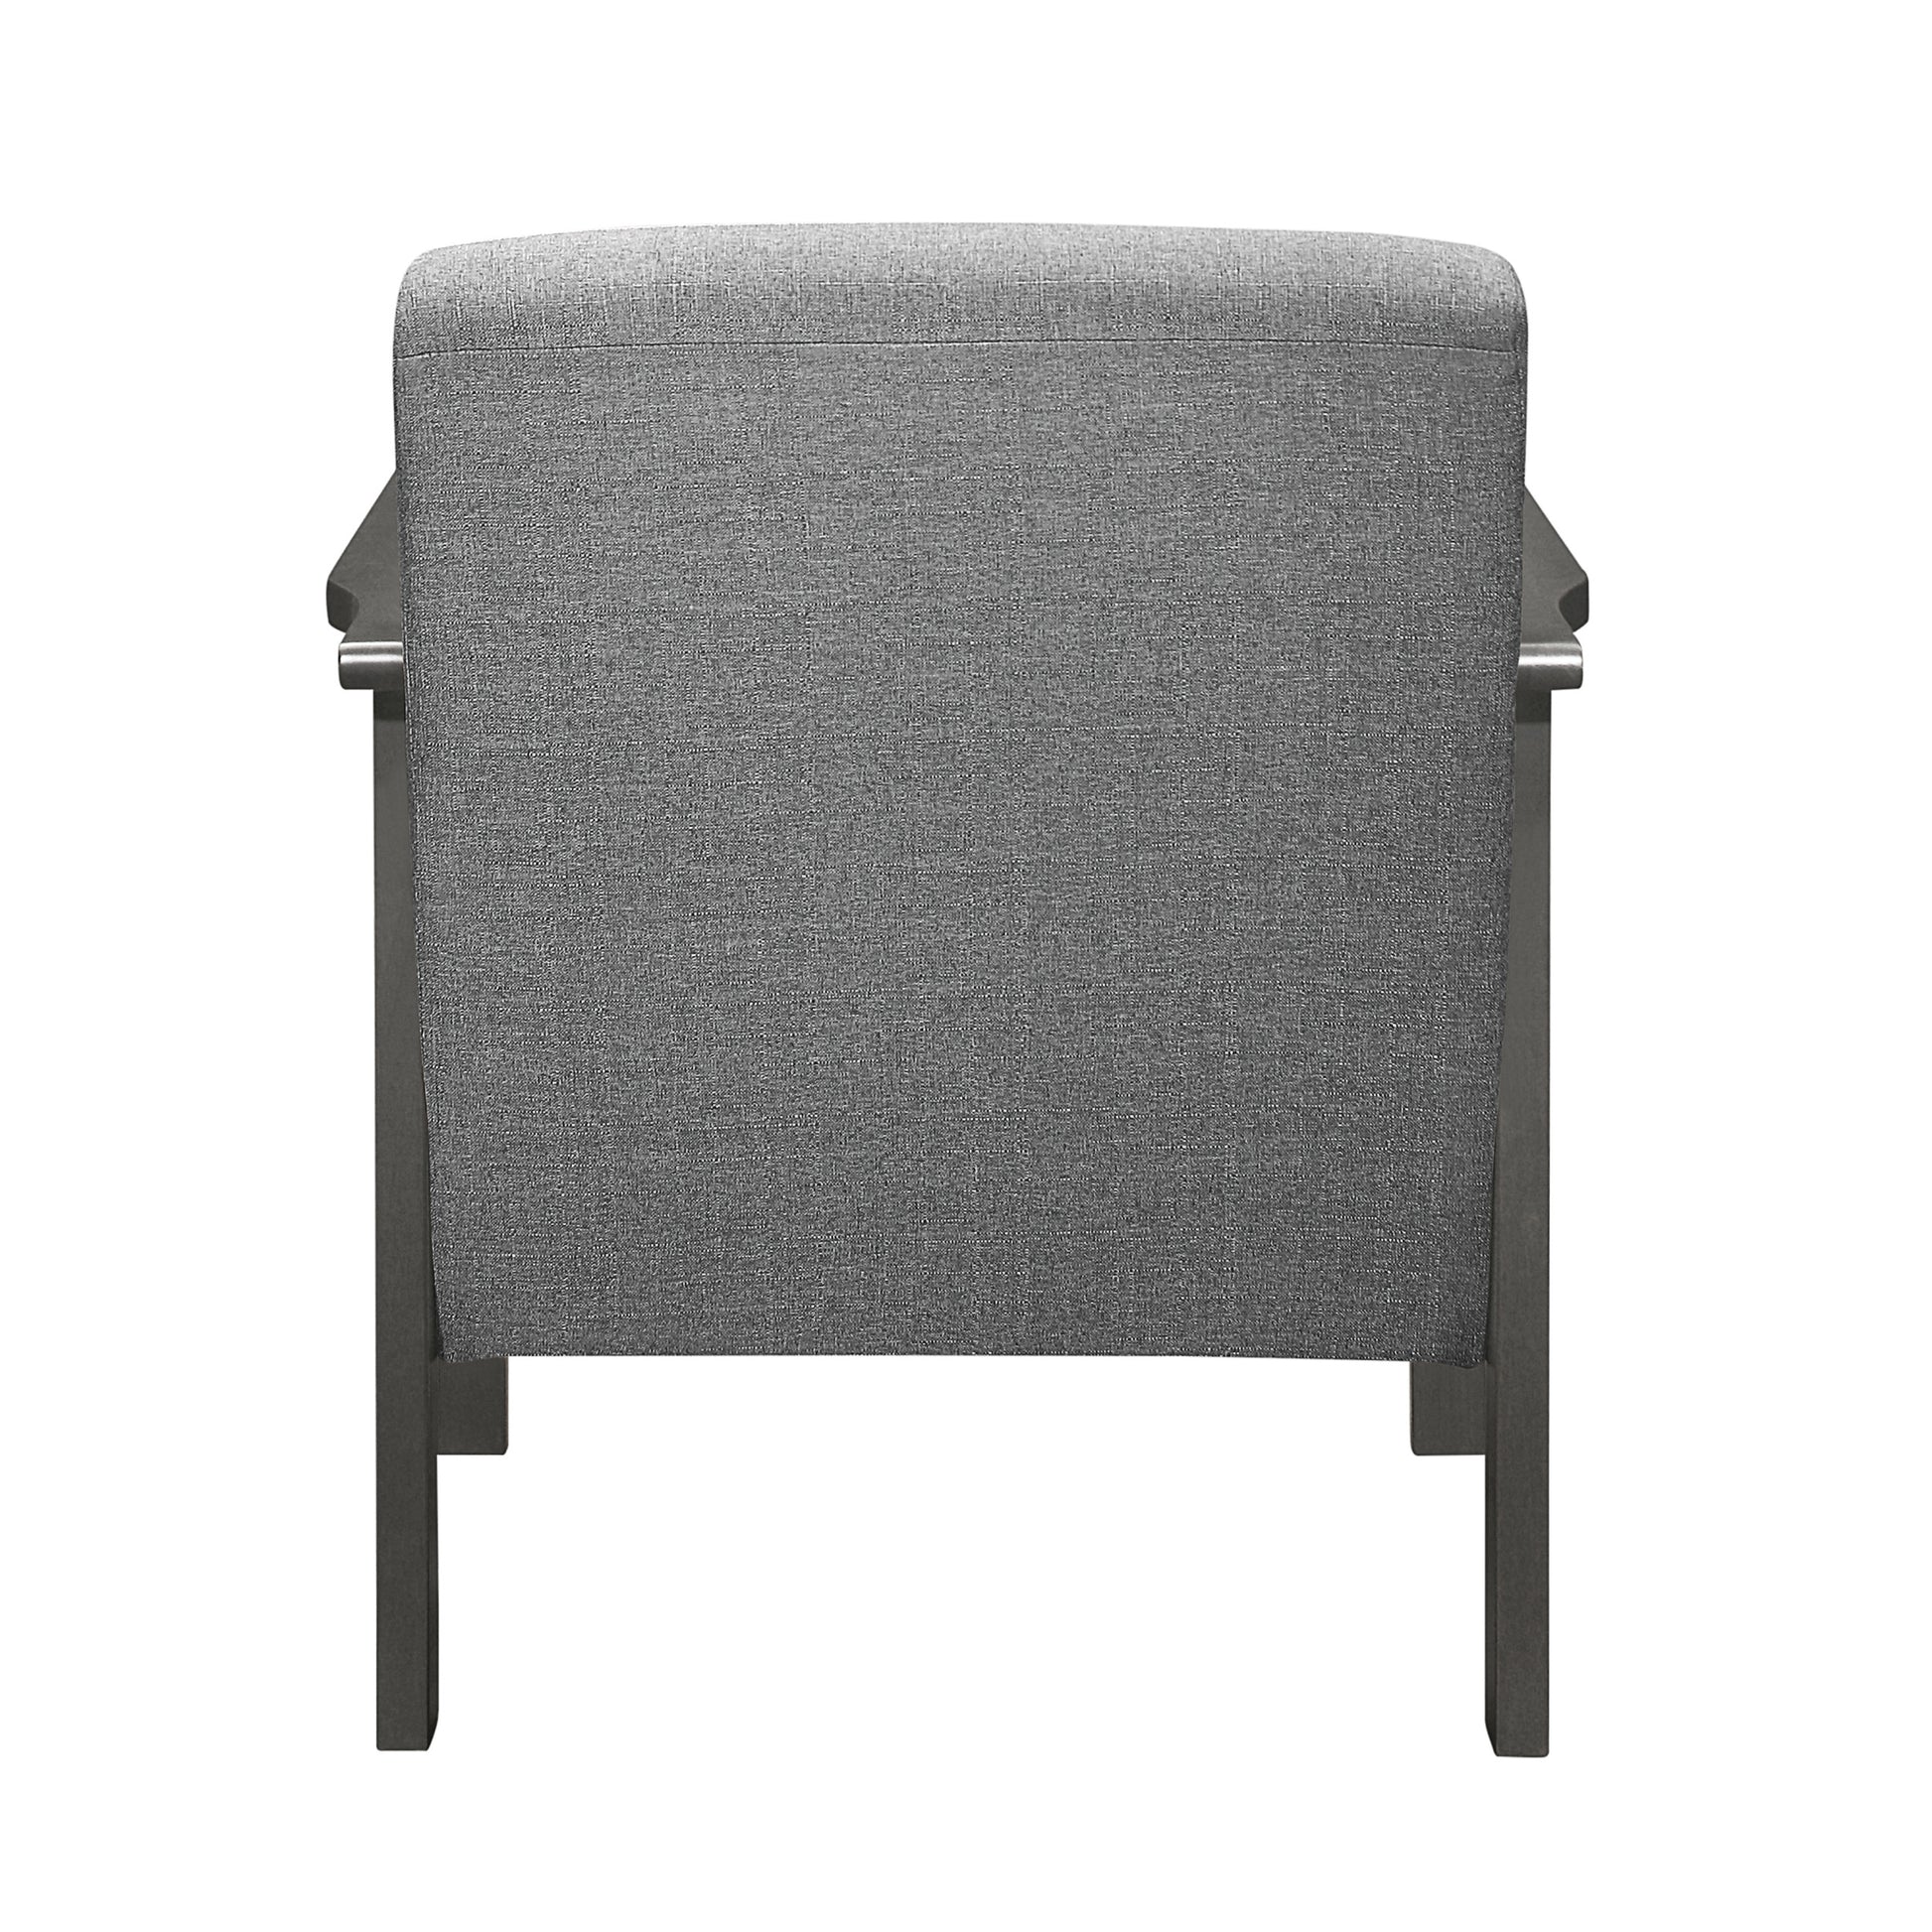 Gray Accent Chair 1pc Solid Wood Mission Arm Cushion gray-primary living